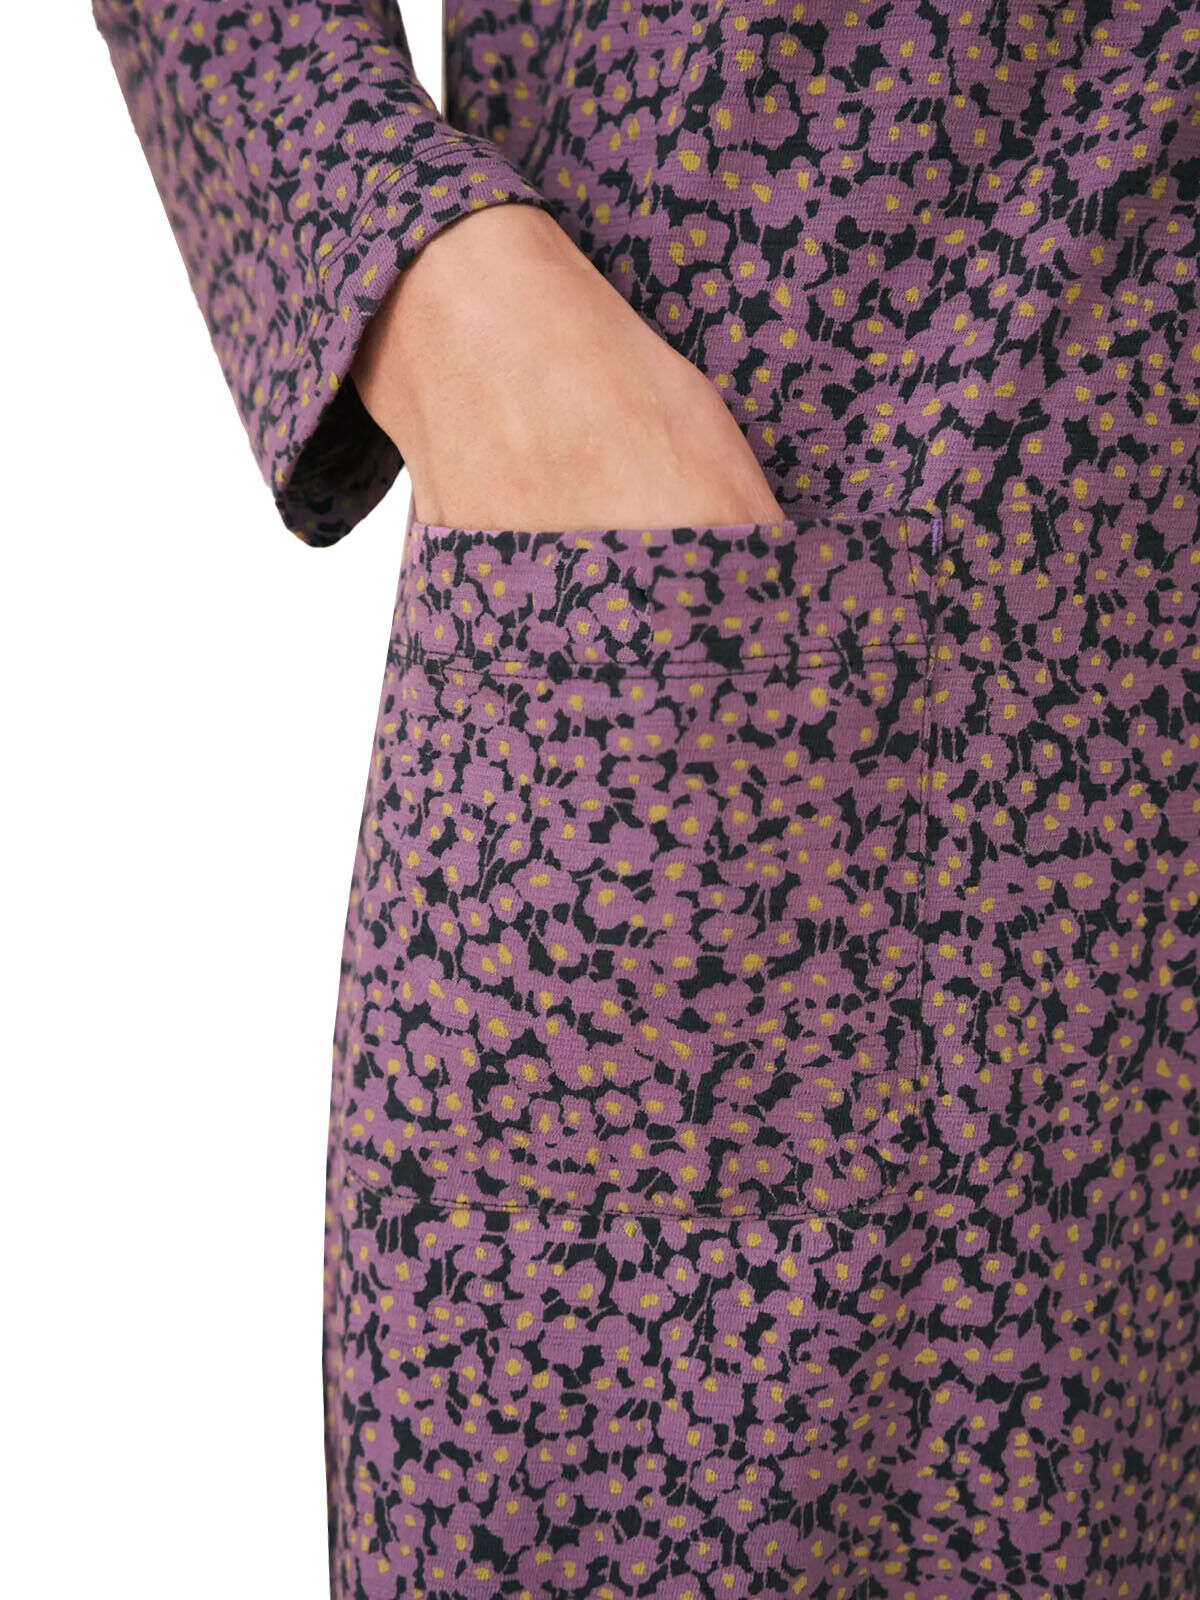 EX WHITE STUFF Pink Bea Fairtrade Dress in Sizes 8, 12, 14, 16, 18 RRP £59